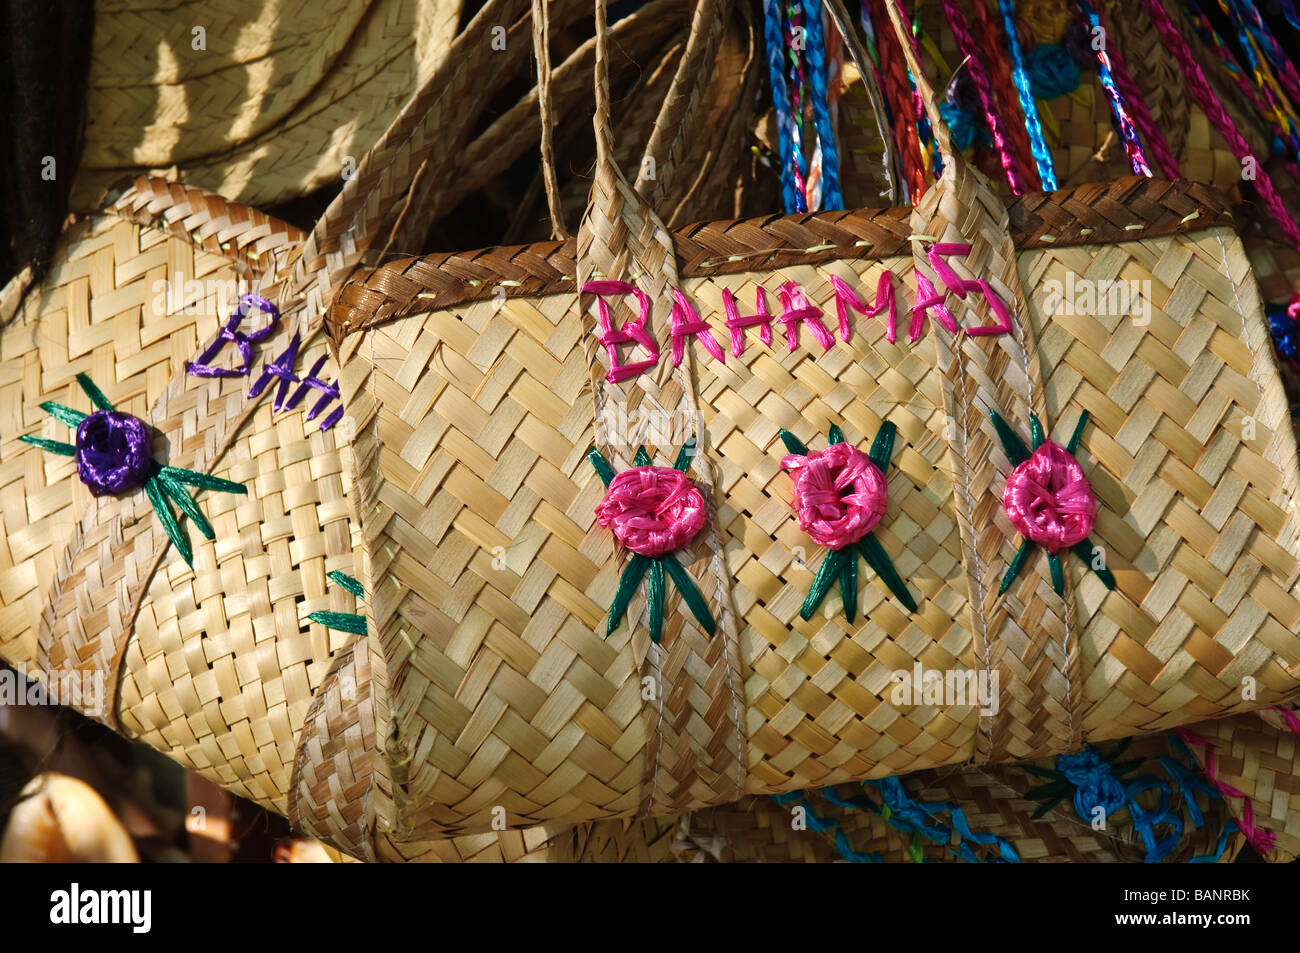 Buy Straw Bag Online In India - Etsy India